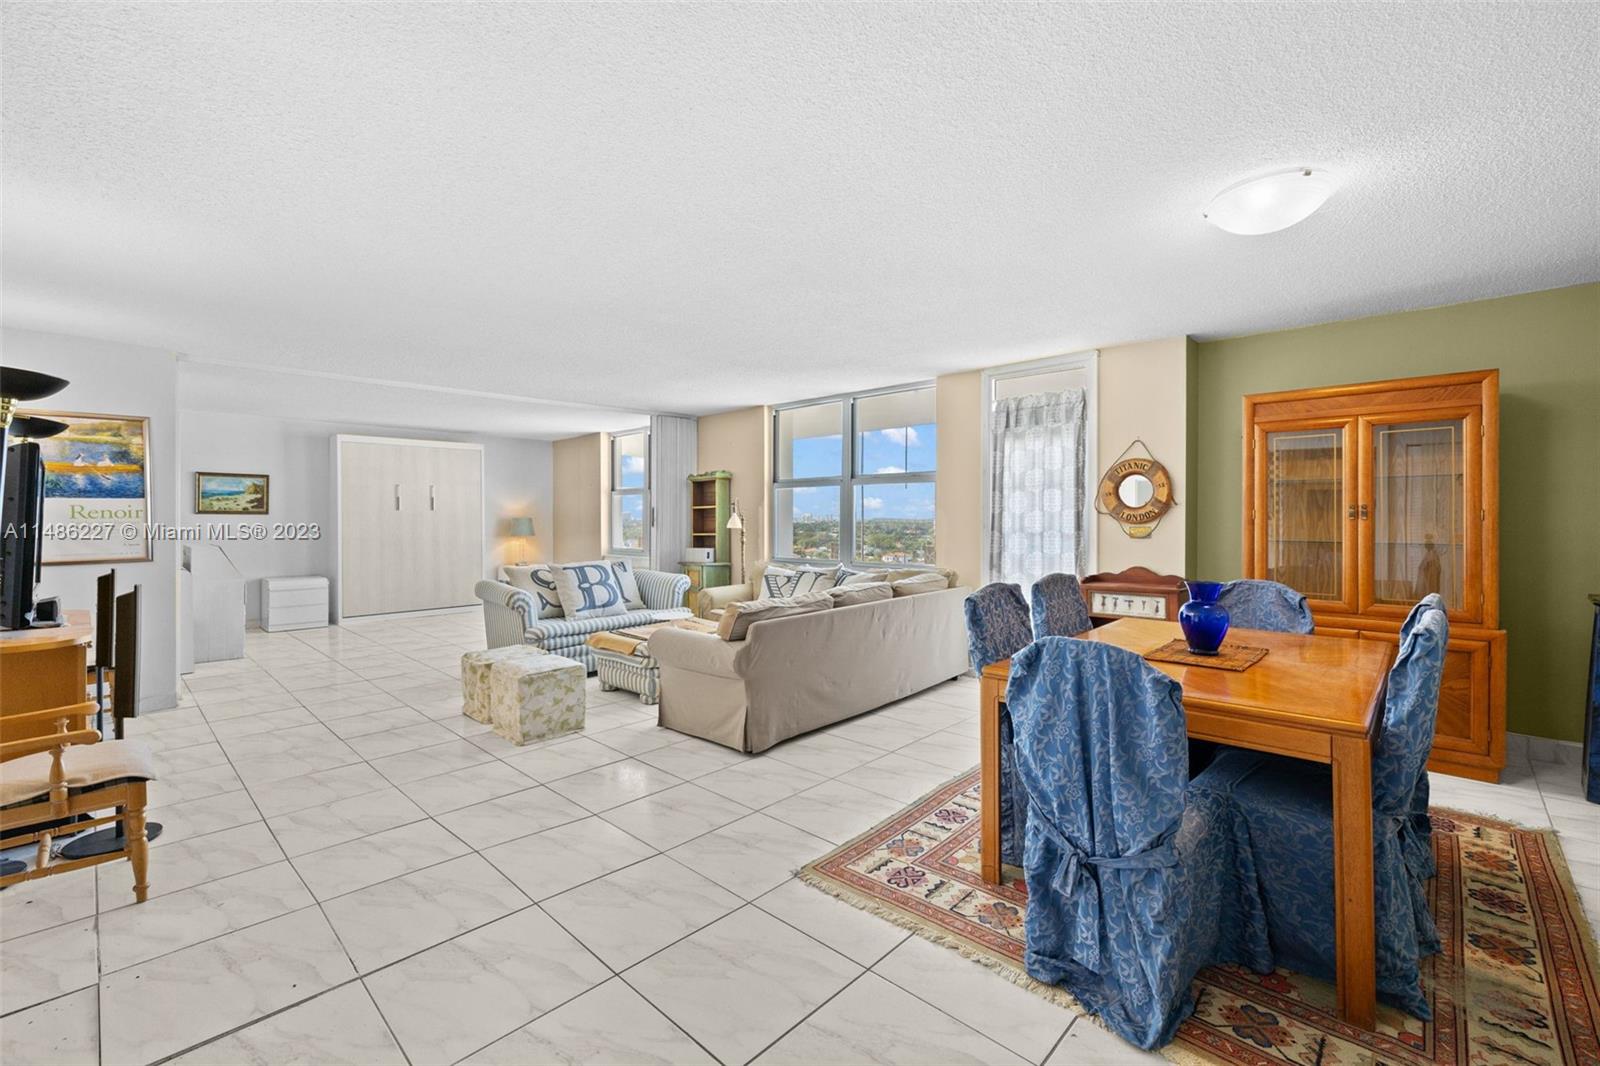 Remarkable sunset views in this corner 2 bedroom 2 bathroom 10th floor condominium. An oceanfront property offering beach service and centrally located in Surfside. 1289 square feet with high impact windows installed throughout. Capture beautiful south west views in daily in this unit. No leasing allowed for first 2 years of ownership.  Pool redone and  as well as backyard. New glass balcony opened!